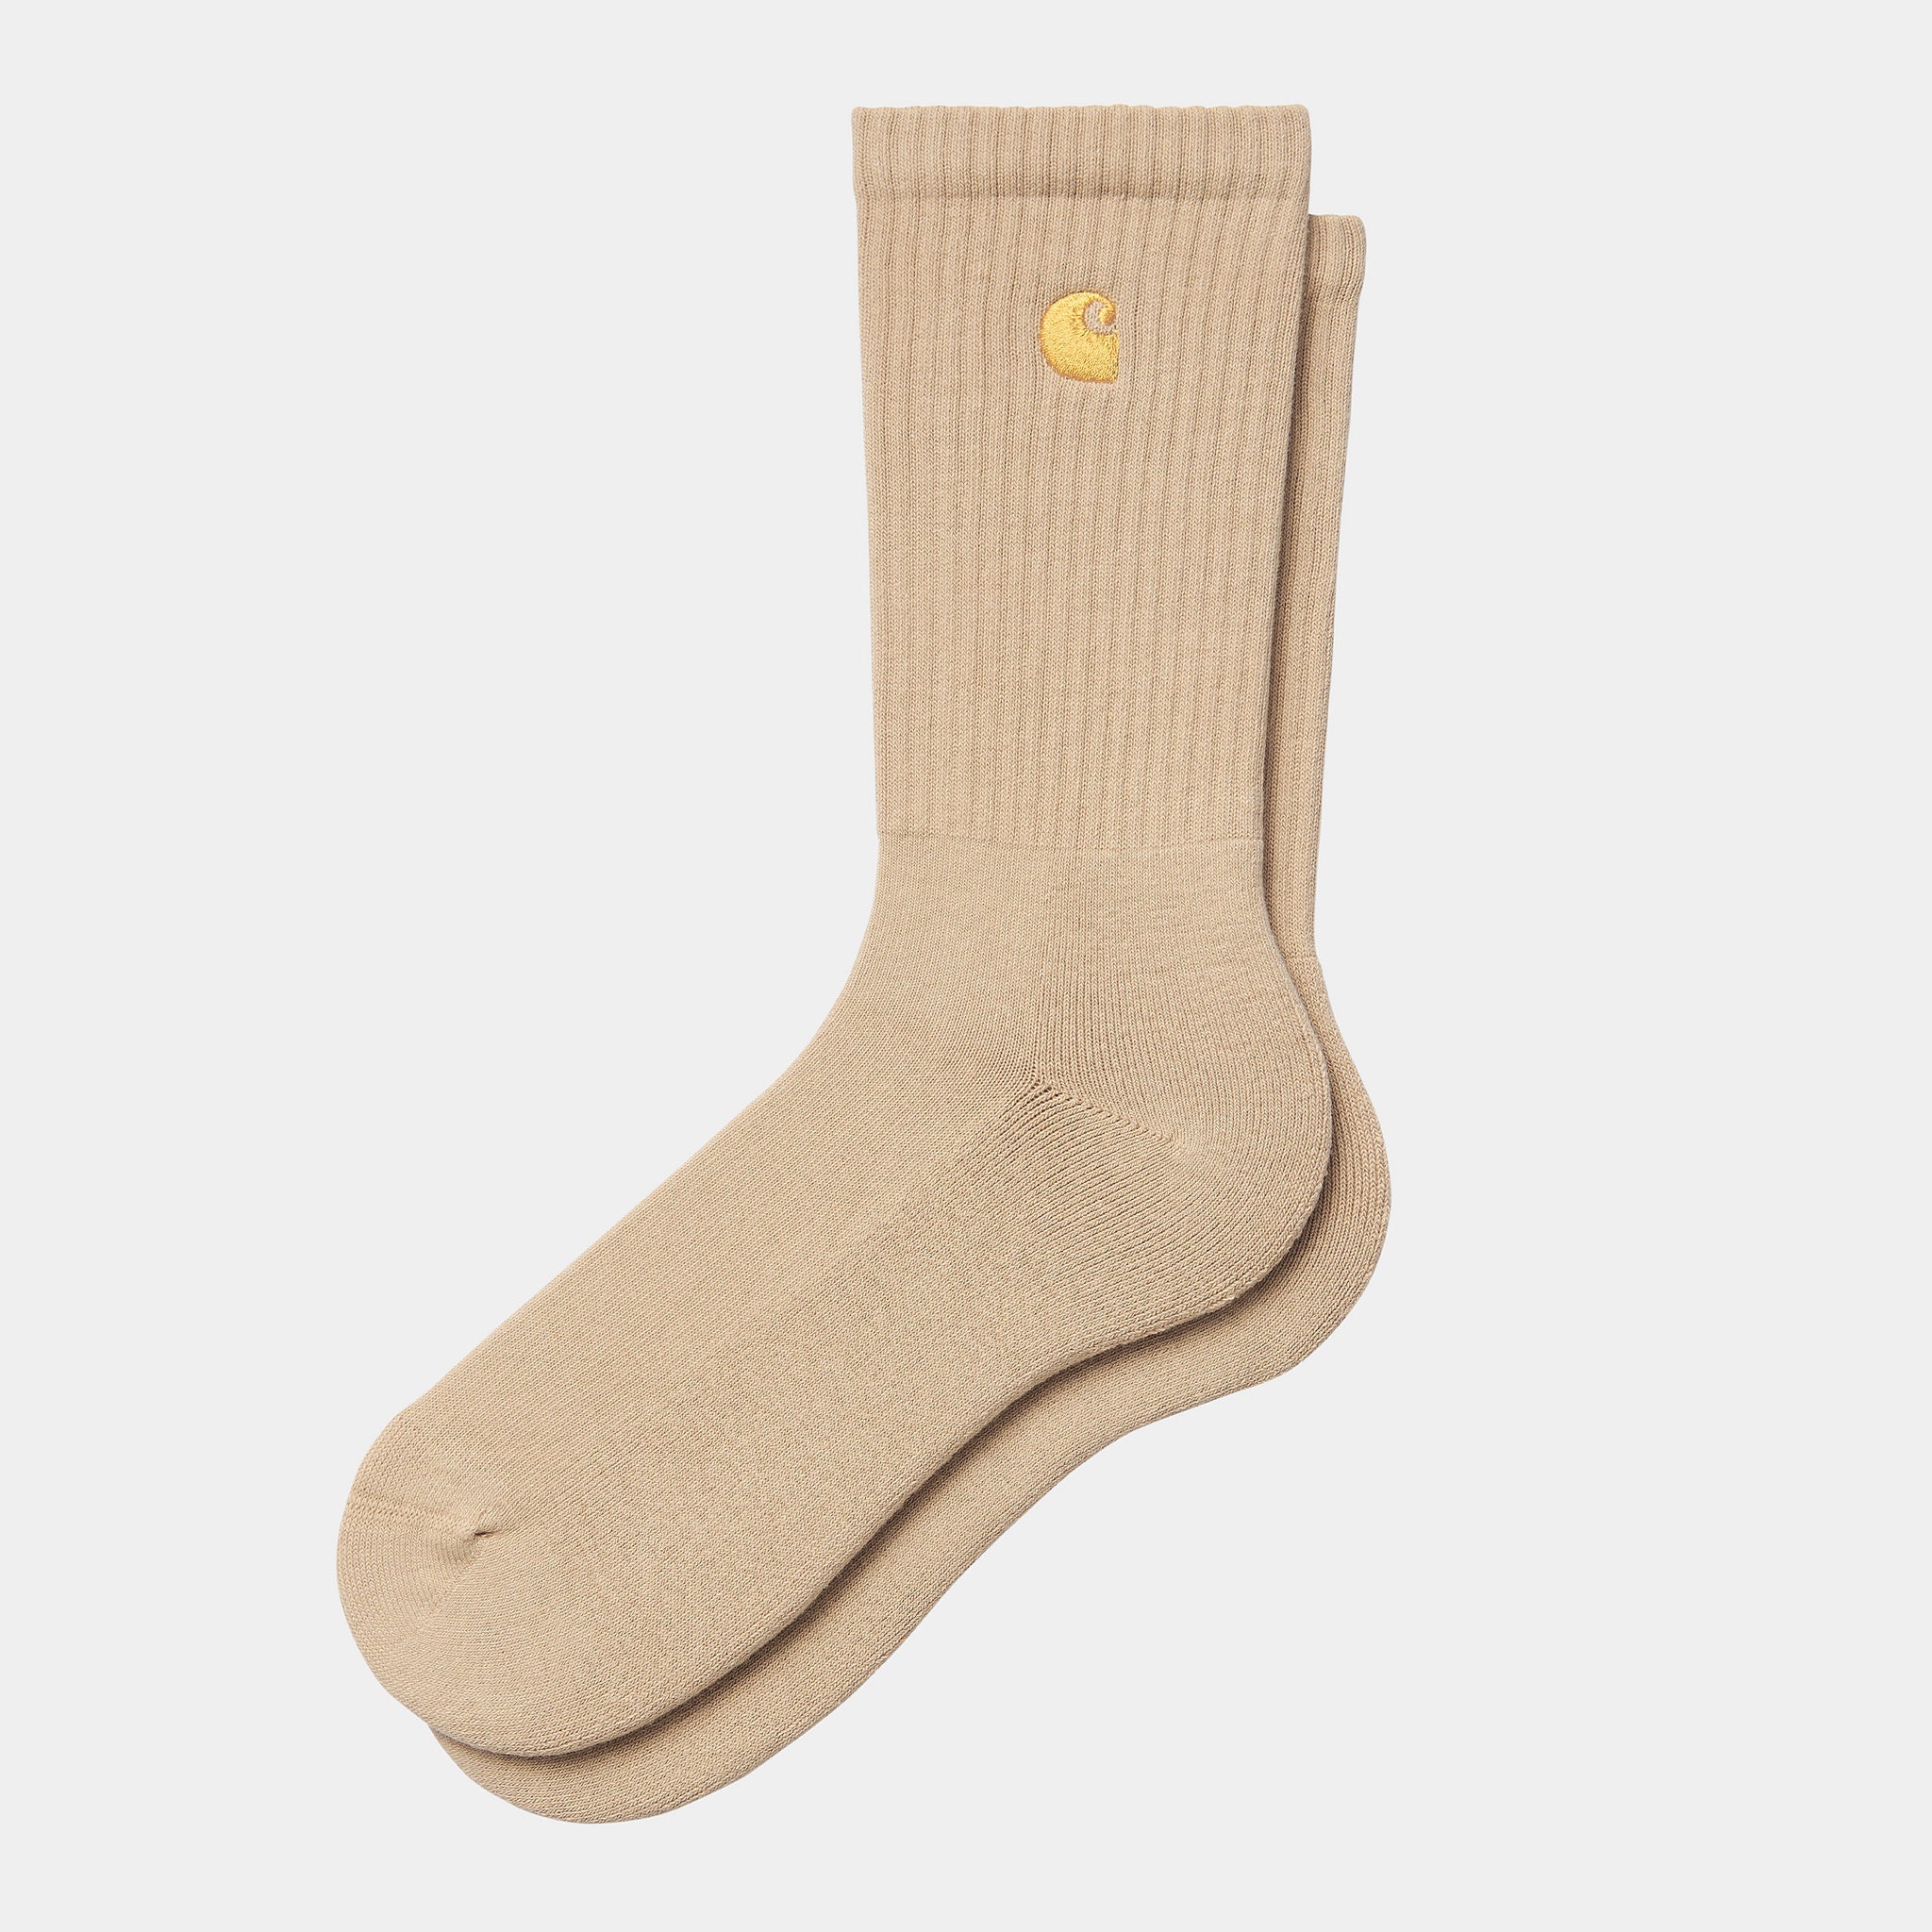 Carhartt Chase Sock - Sable/Gold